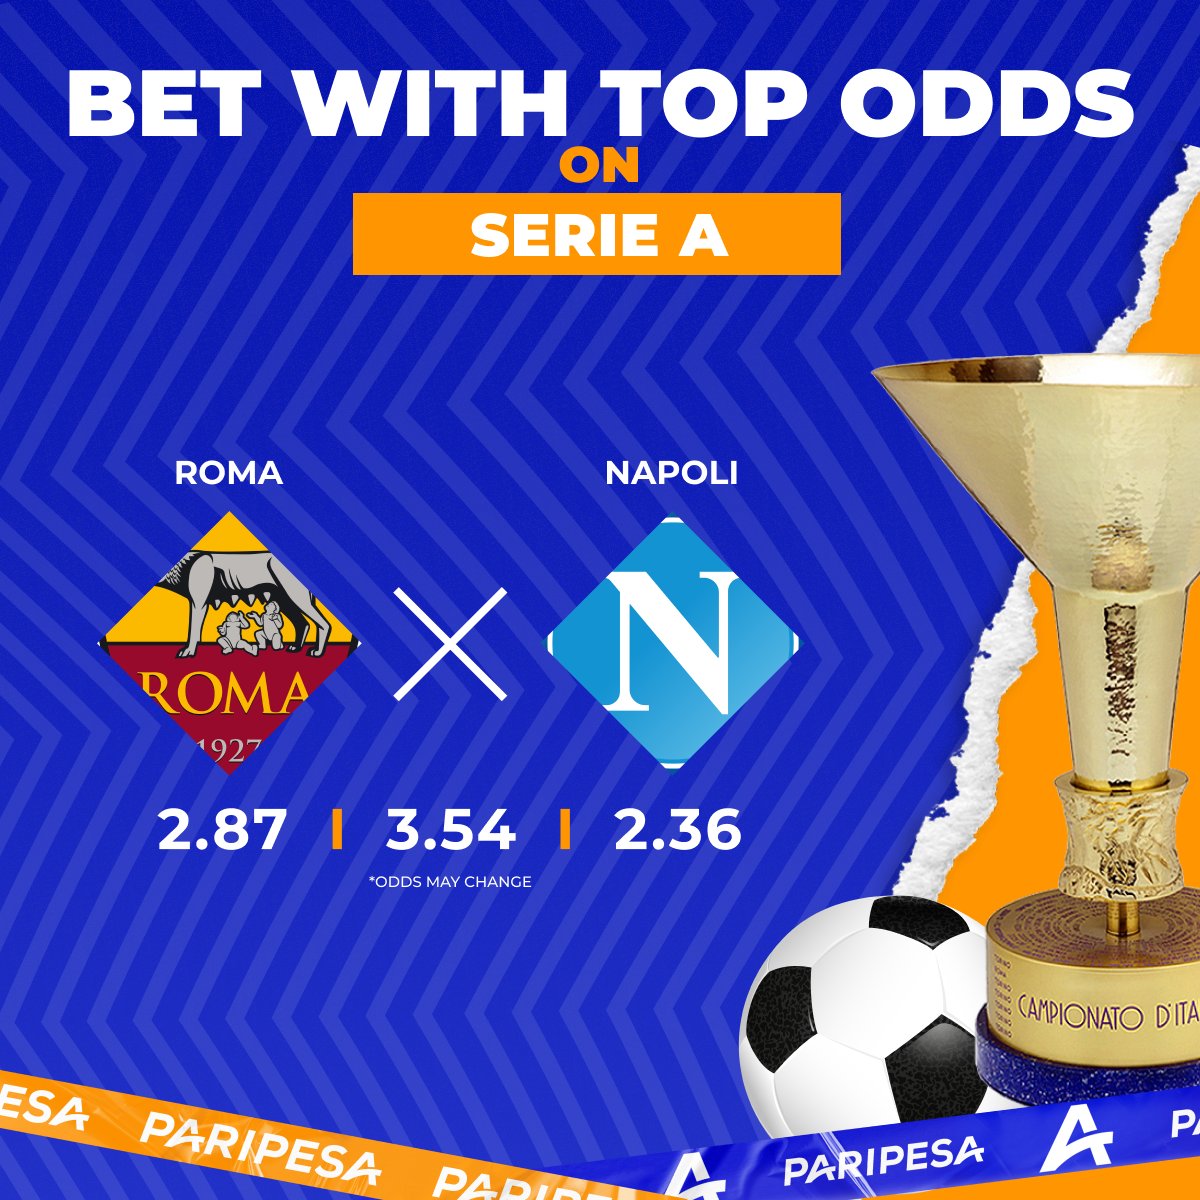 🚀 Napoli looks just unstoppable! 🤑 If you think so, then HUGE 2.36 odd is for you! 🙌 Otherwise we give opportunities to bet on any possible event in this match. ⚽😉 Maybe you know who will score today? m.paripesa.bet/xfvs #SerieA